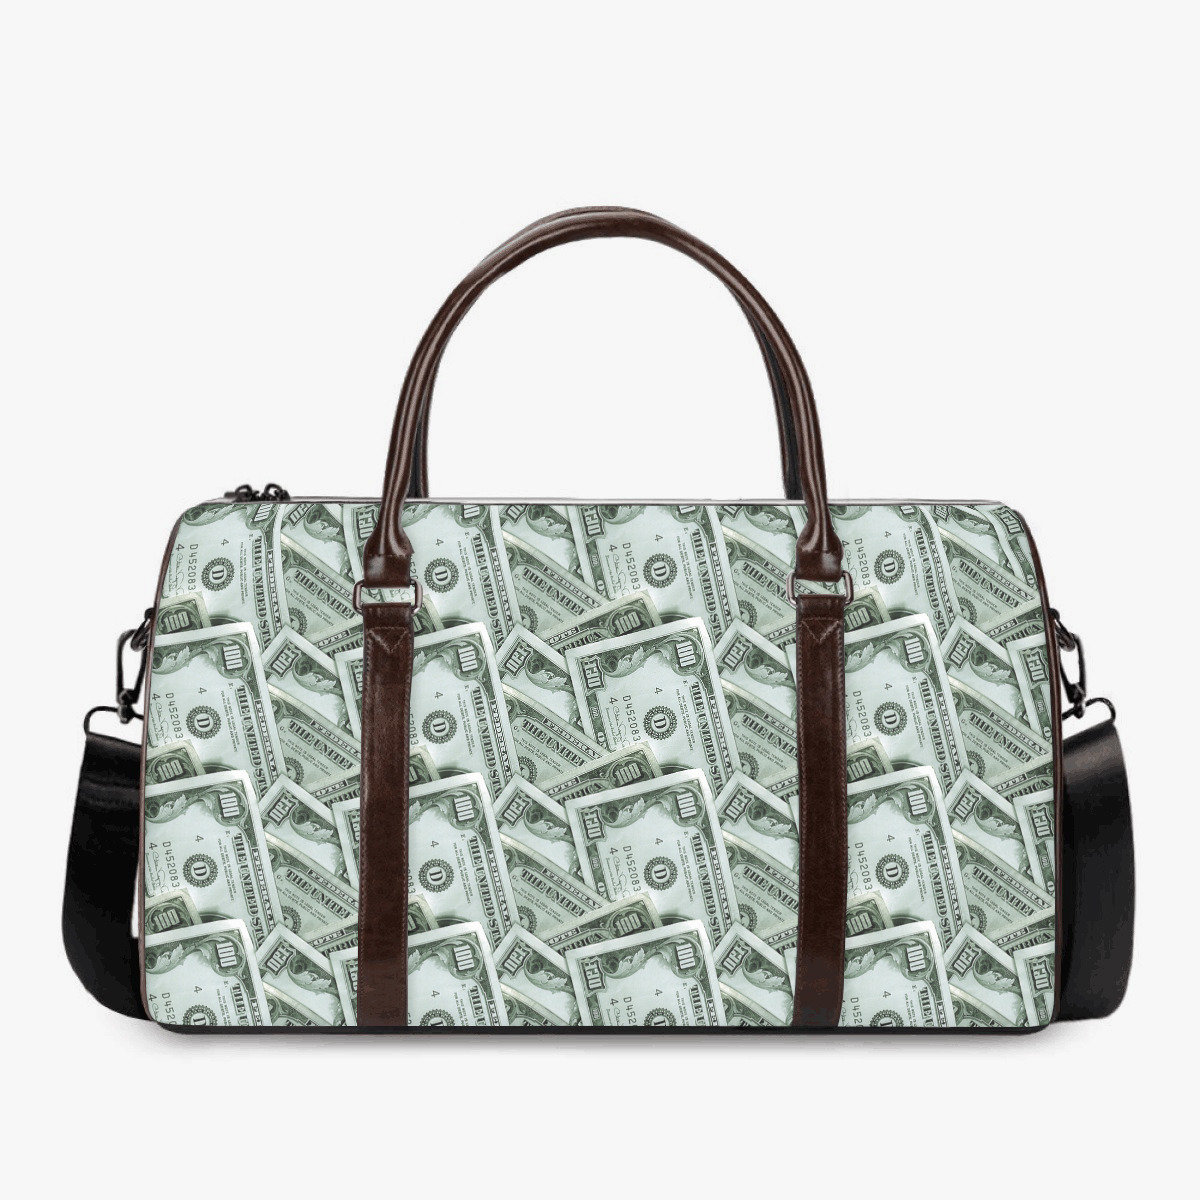 Two Black Males Father Son Cash Money Bank Chains Duffle Bag -  Denmark